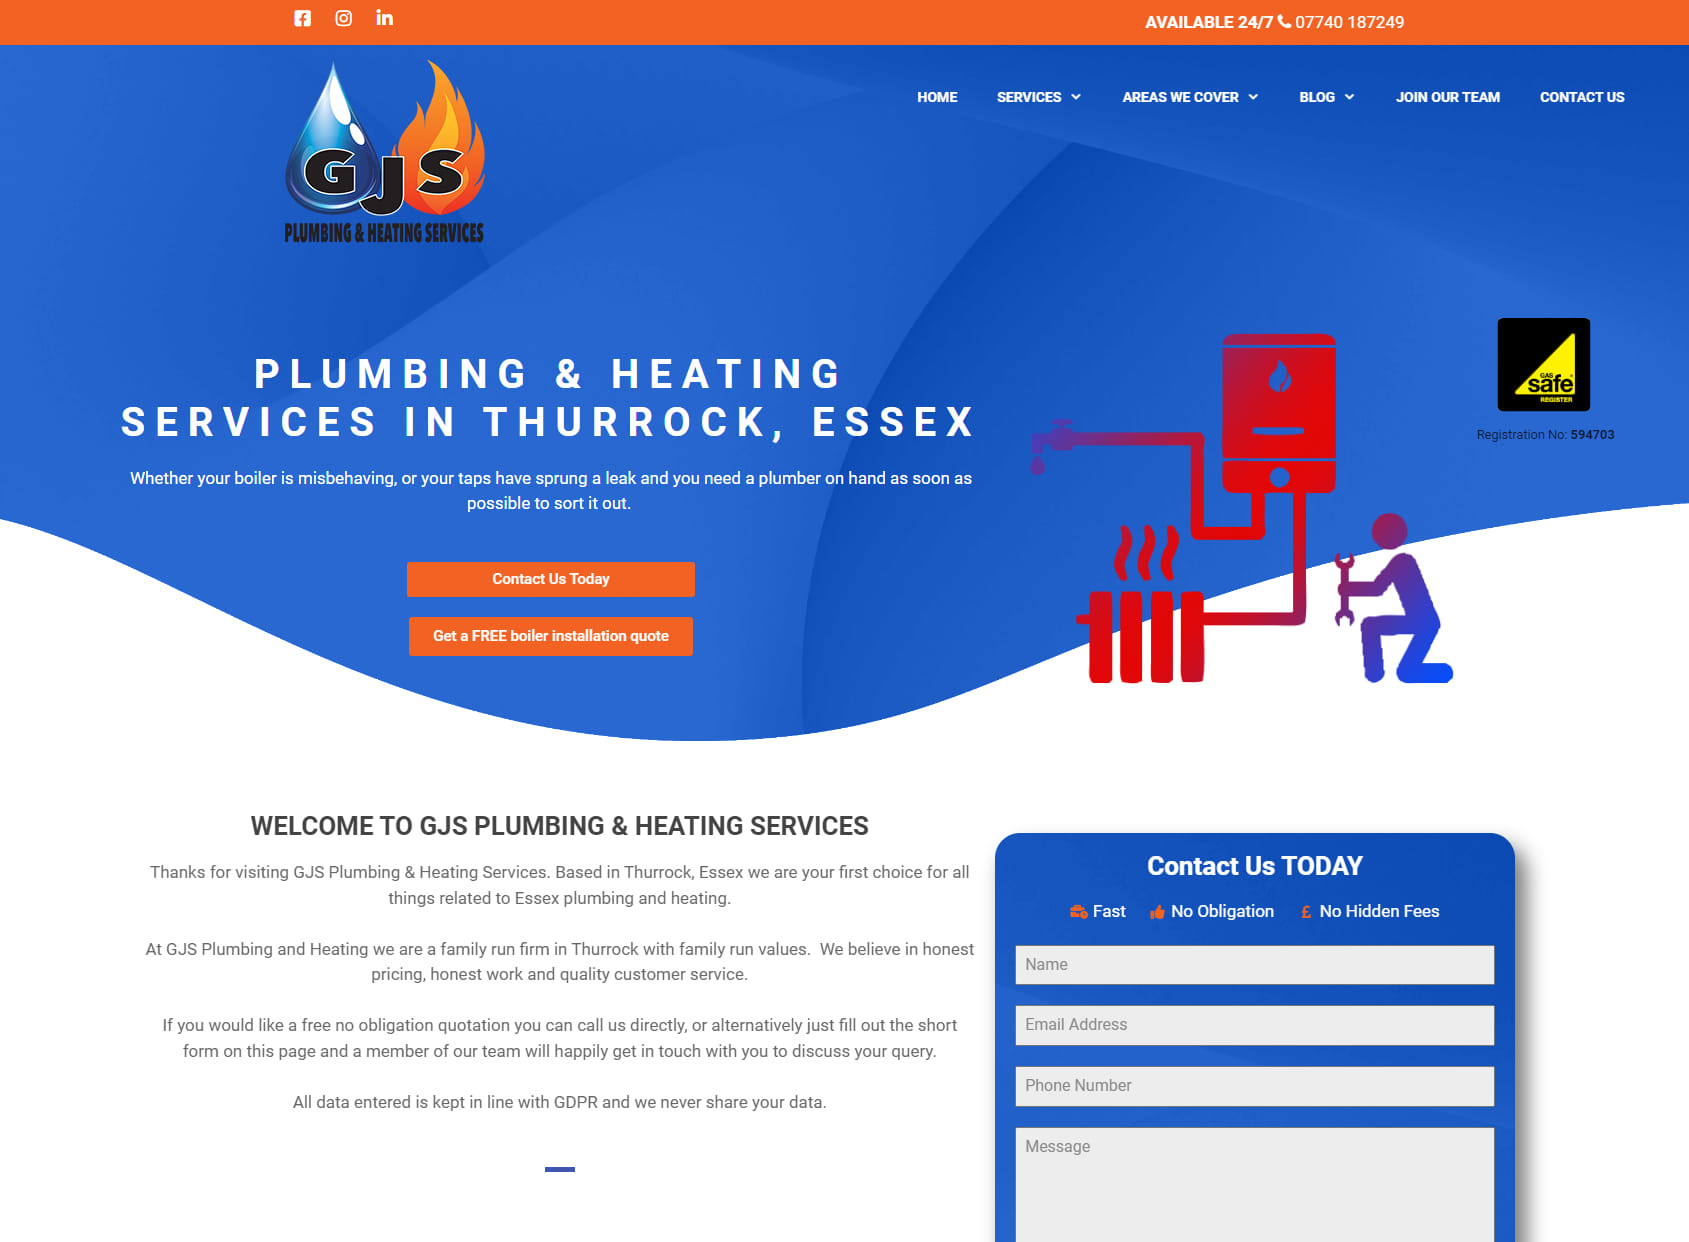 GJS Plumbing and Heating Services Ltd (Essex)